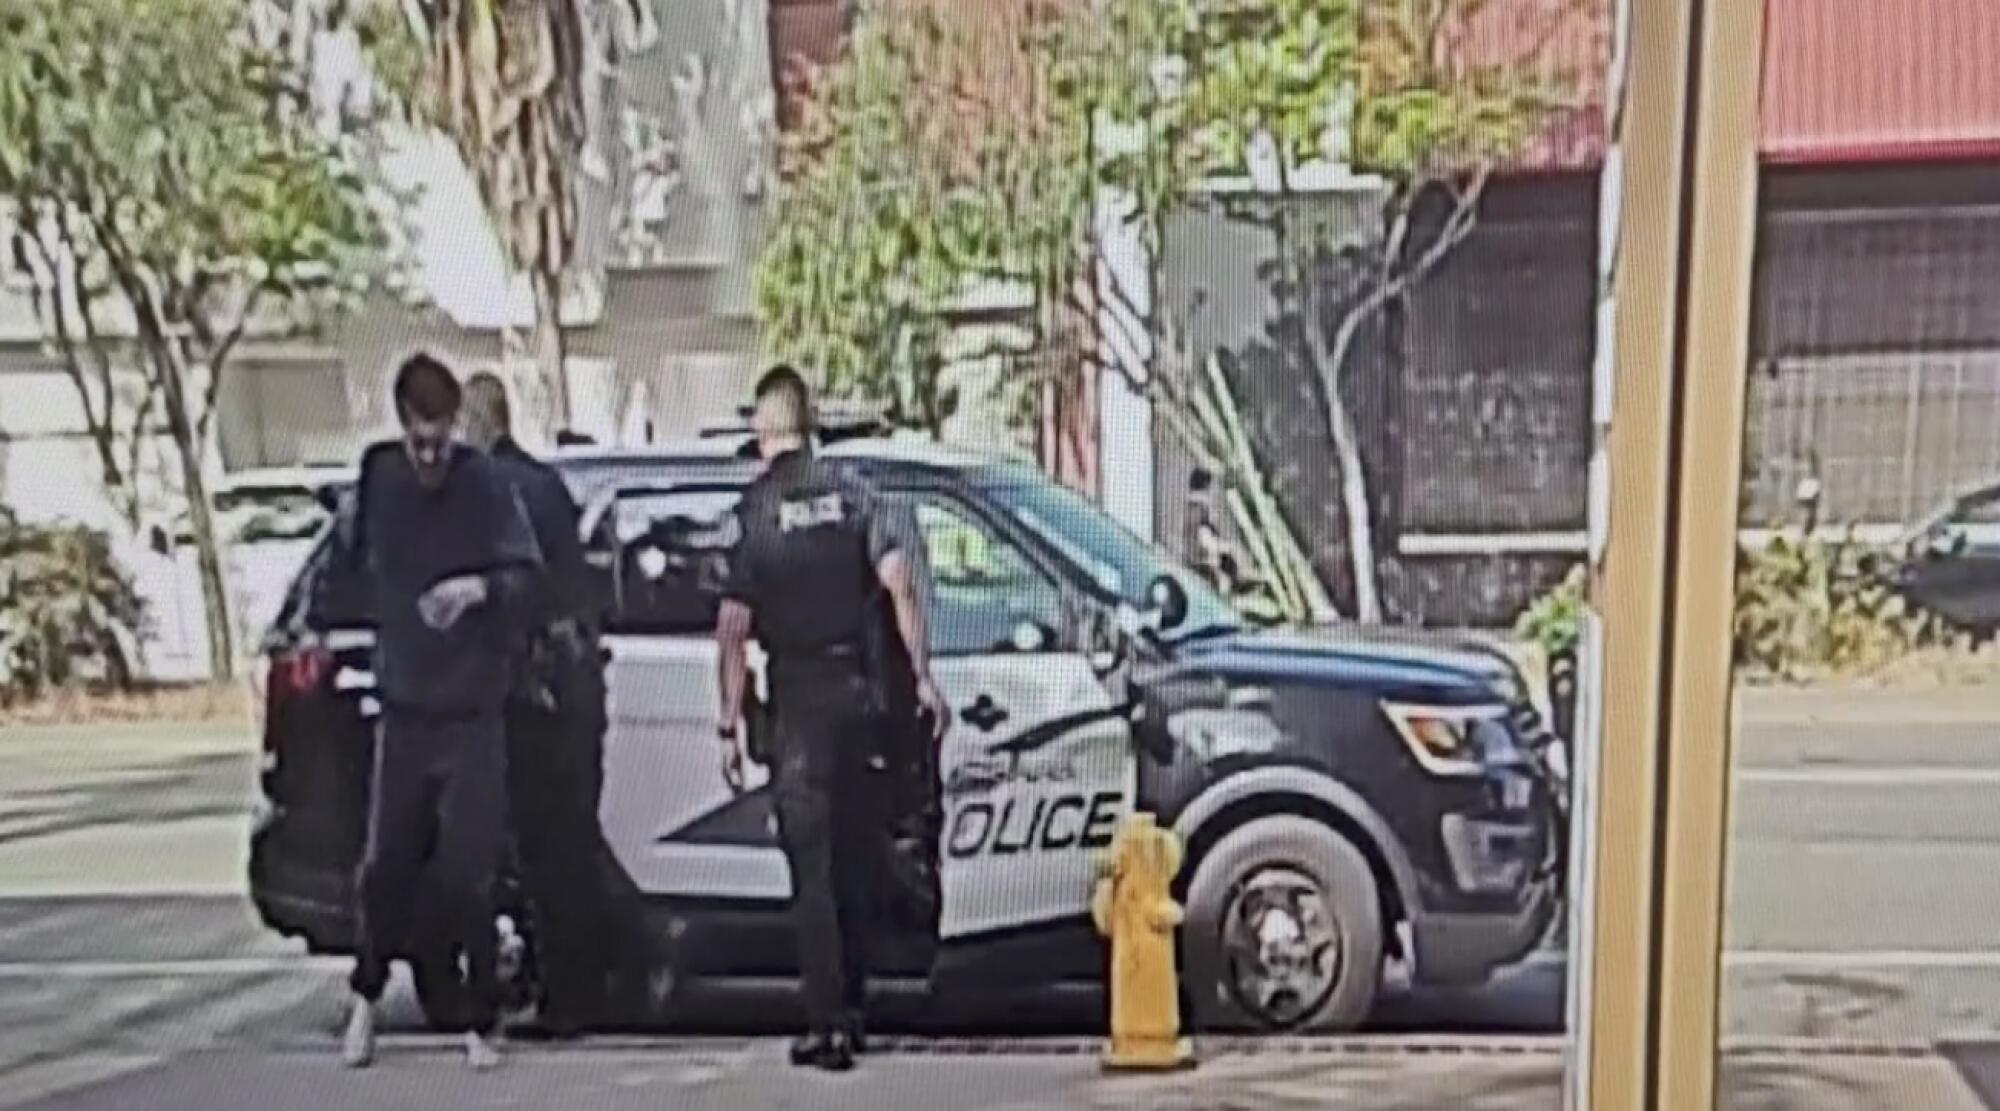 Video showed Burbank police dropping off a homeless man in North Hollywood. 